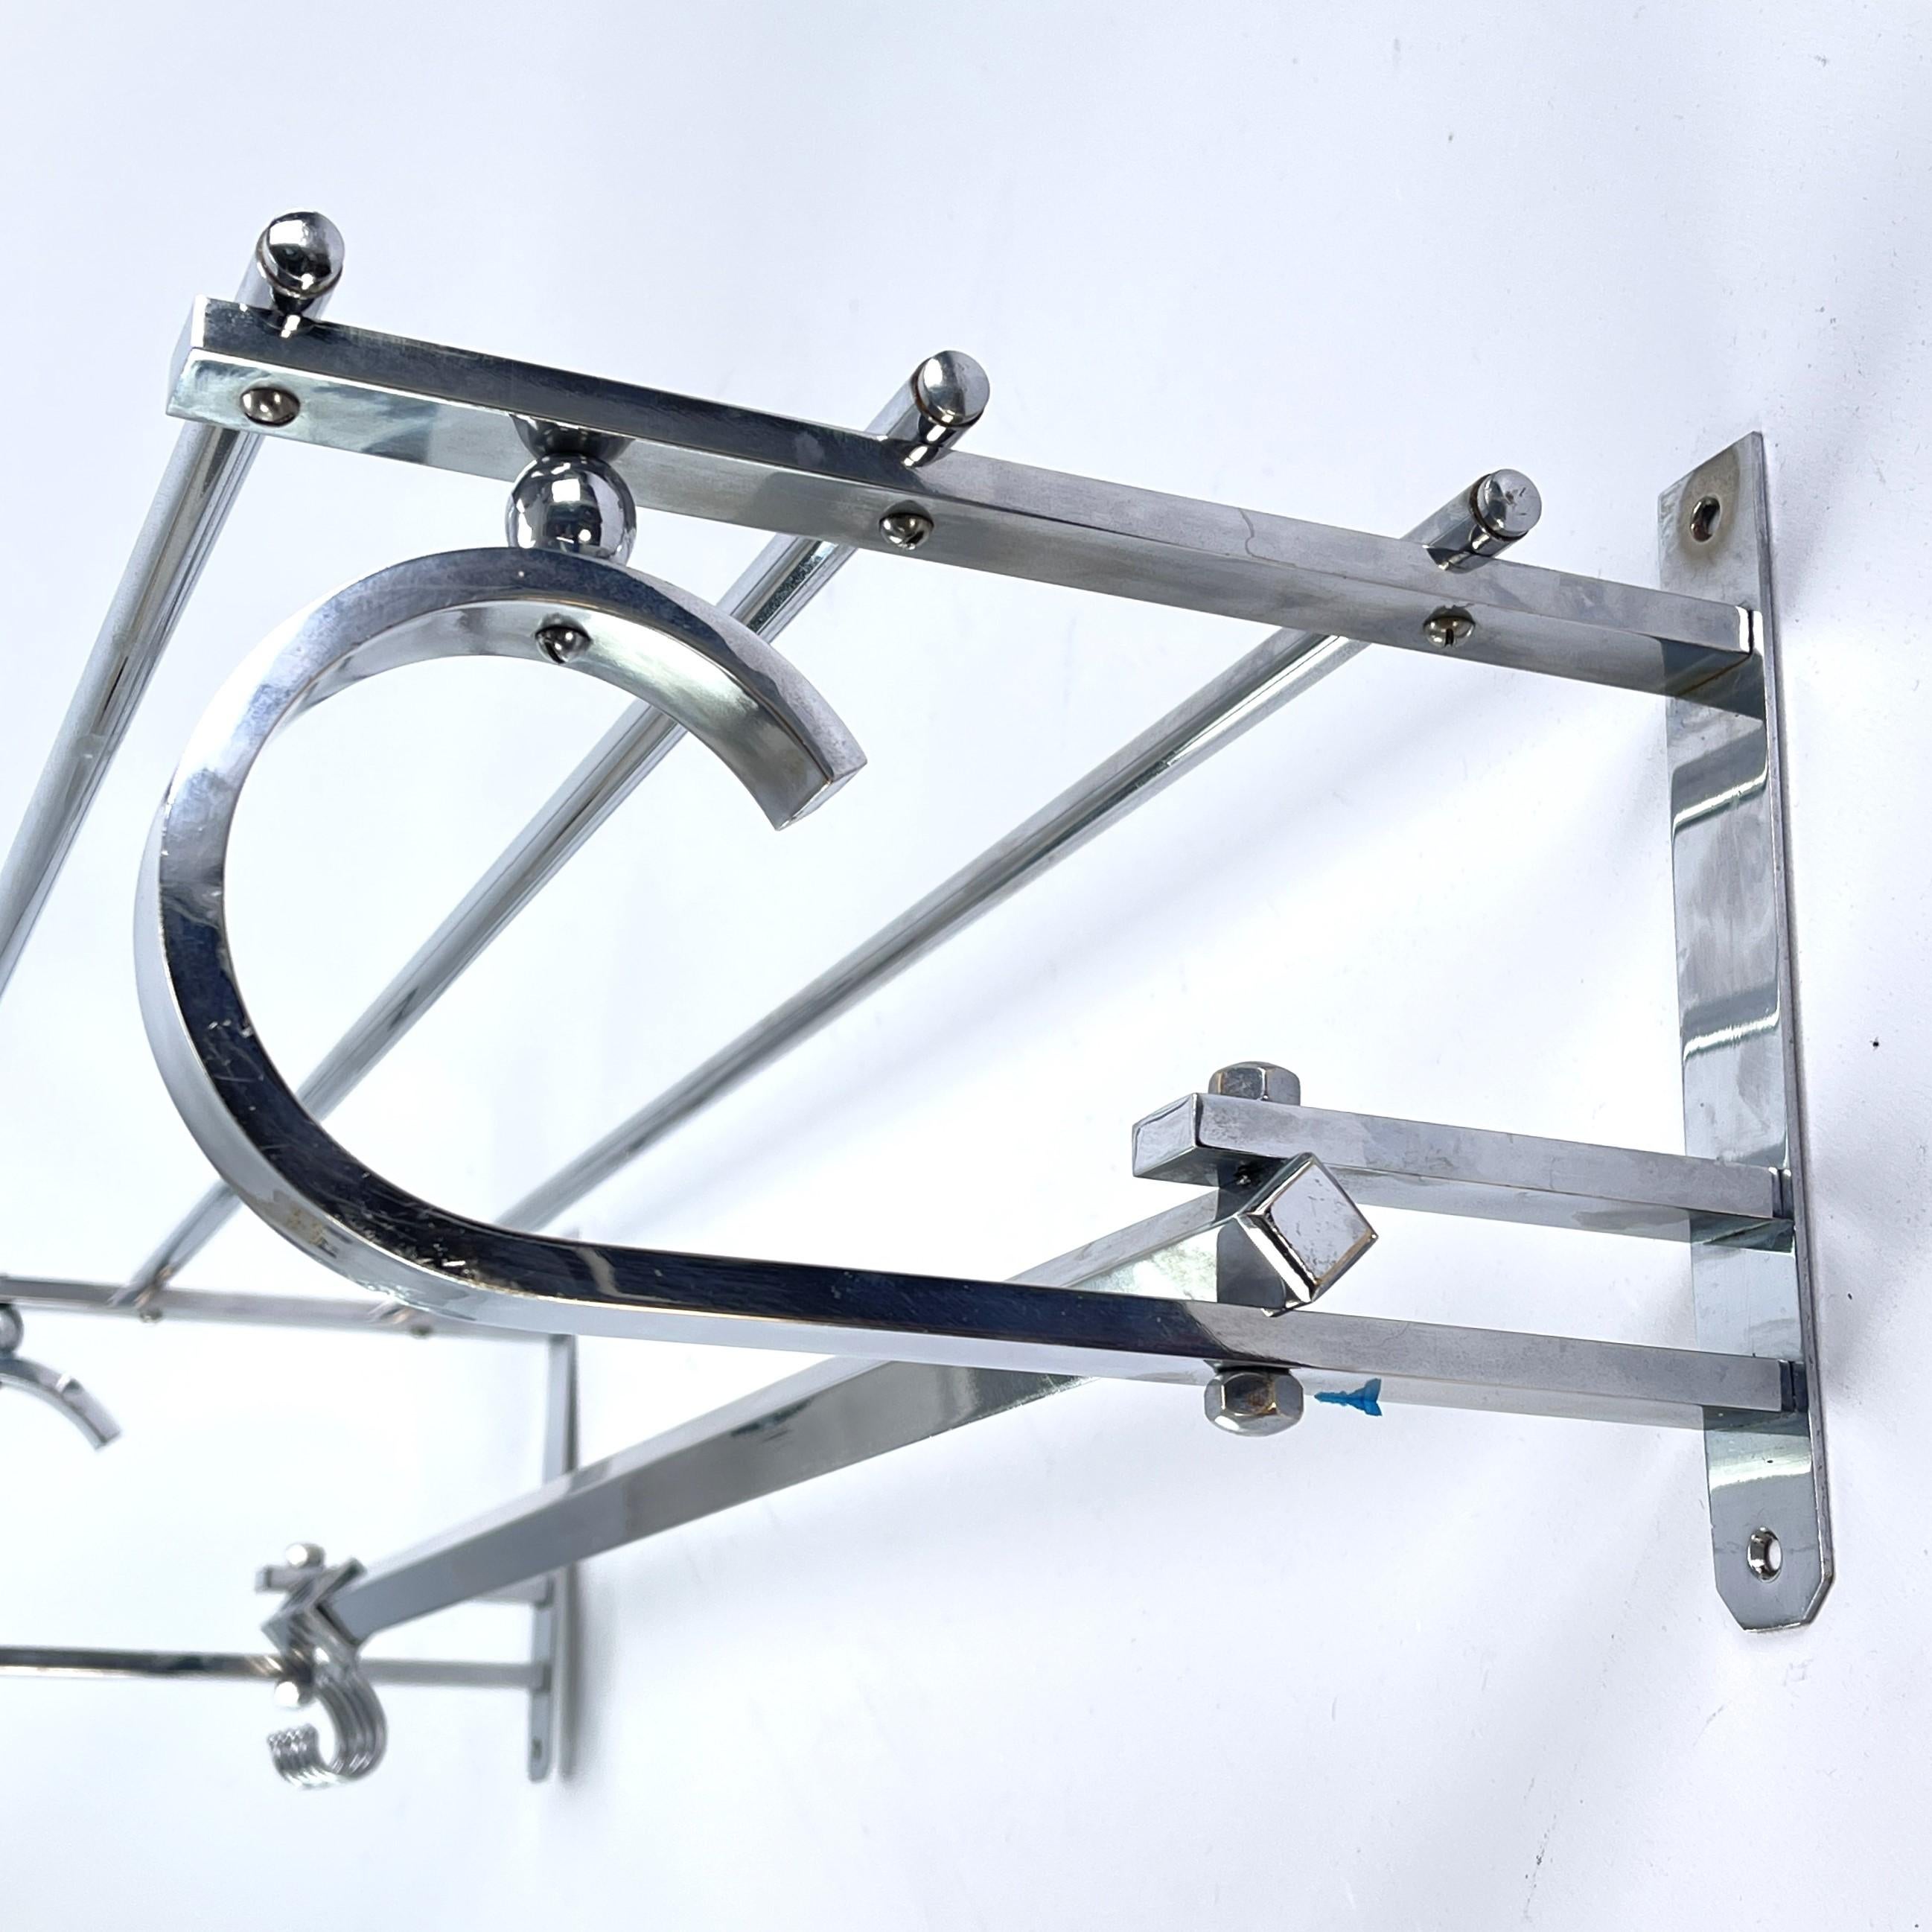 Art Deco wardrobe chrome - 1930s

This beautiful French wall coat rack from the 1930s is in the streamline modern Art Deco style. This style emphasized curvy streamlined shapes. This is a beautiful, timeless and antique piece that will leave a